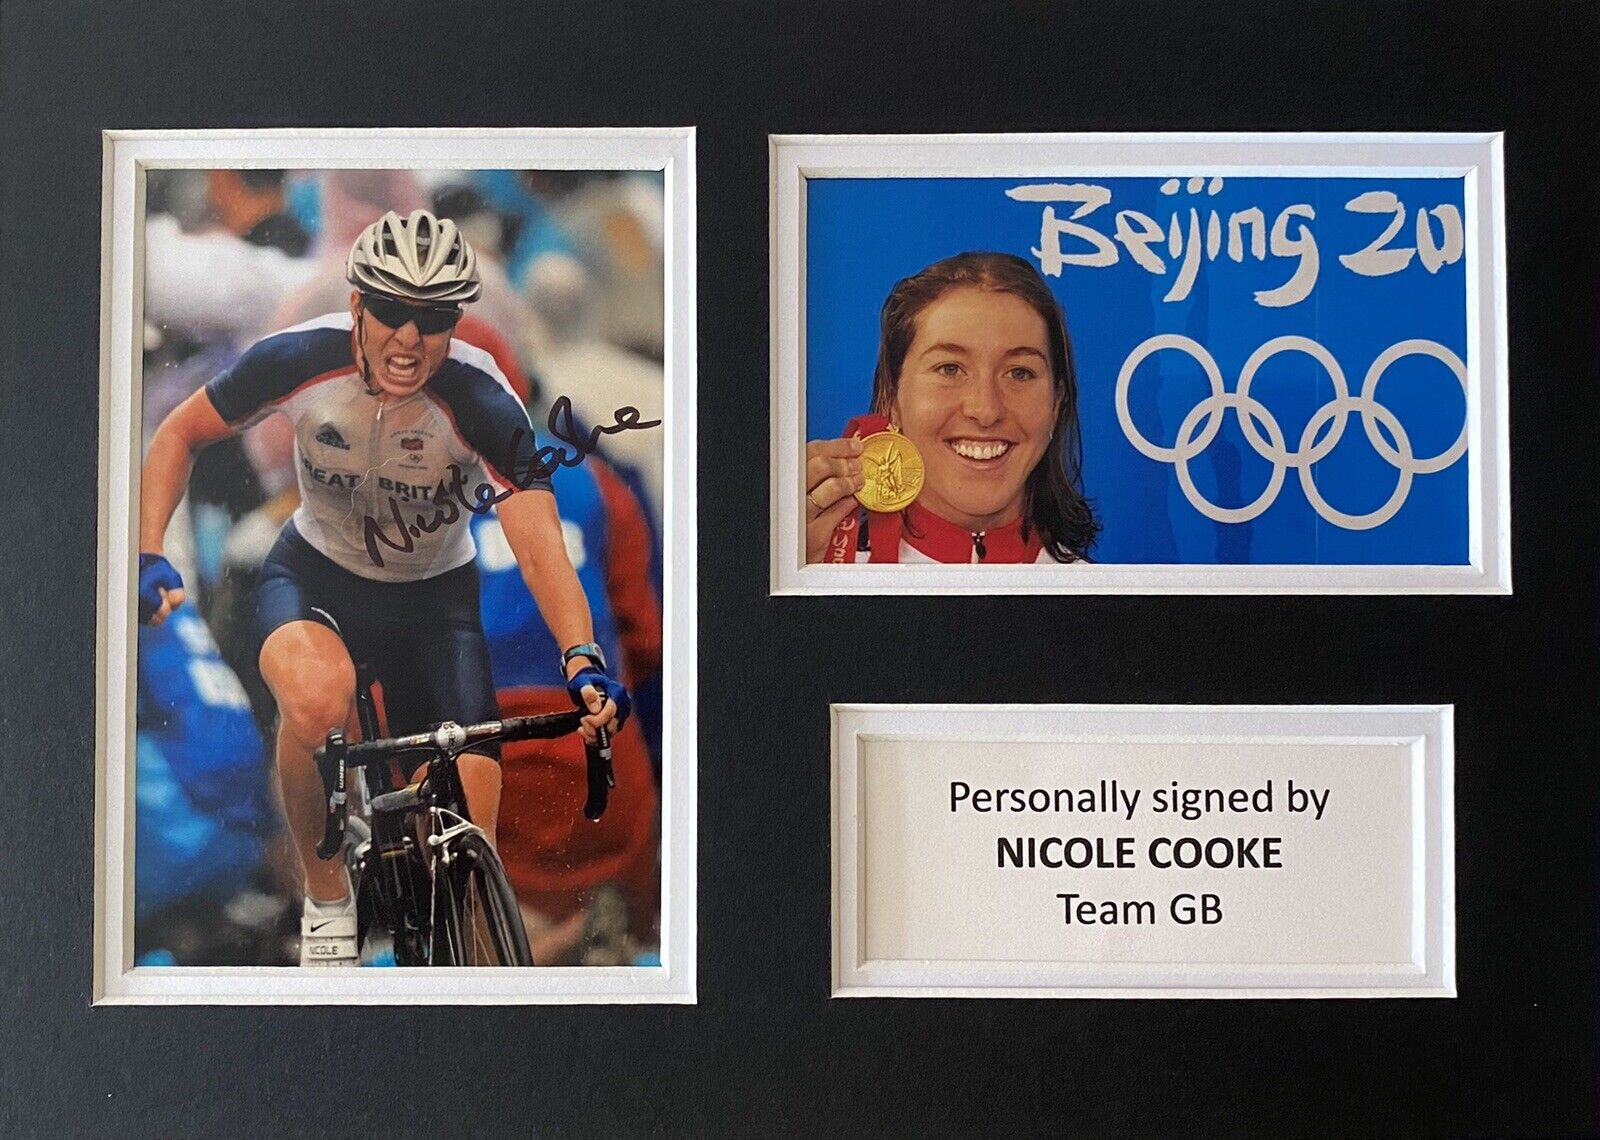 Nicole Cooke Hand Signed Photo Poster painting In A4 Mount Display - Olympics - Team GB 2